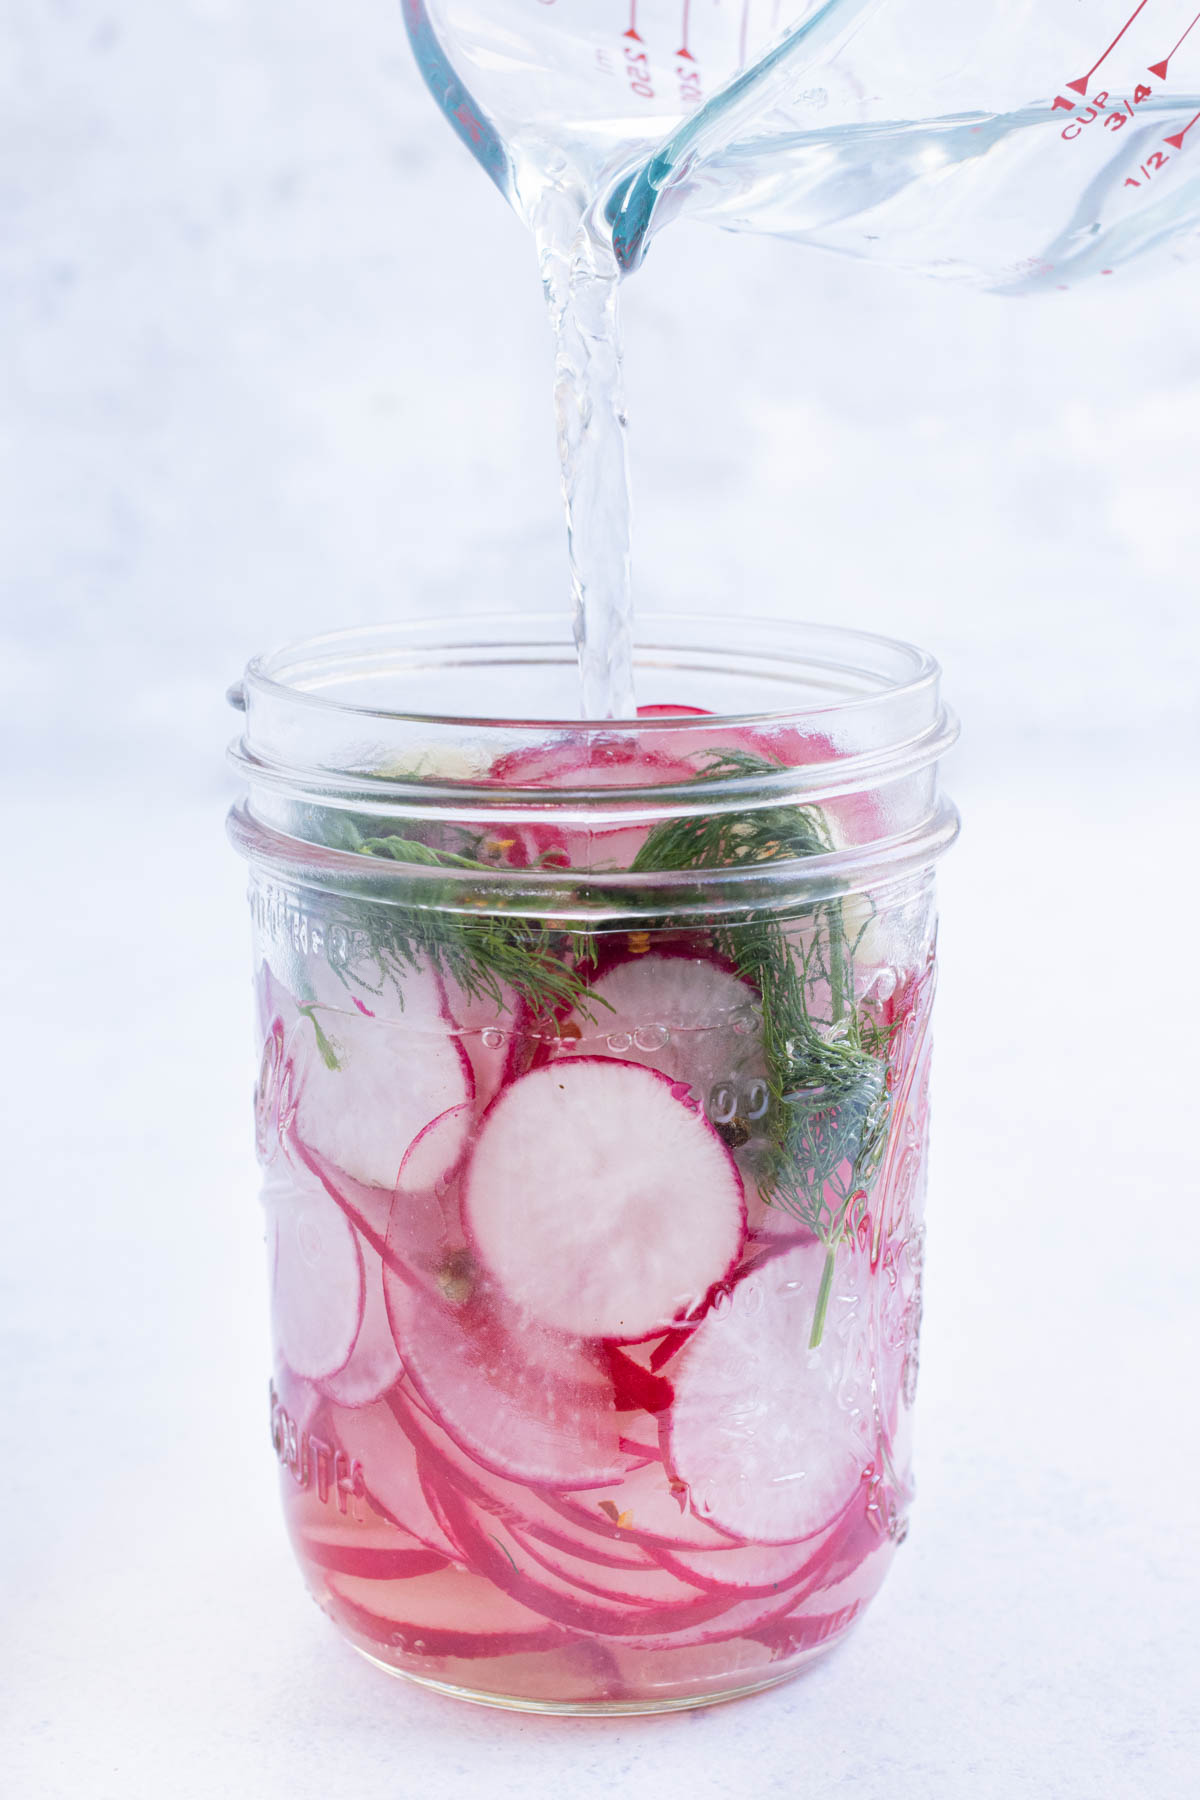 Brining solution is poured over sliced radishes.